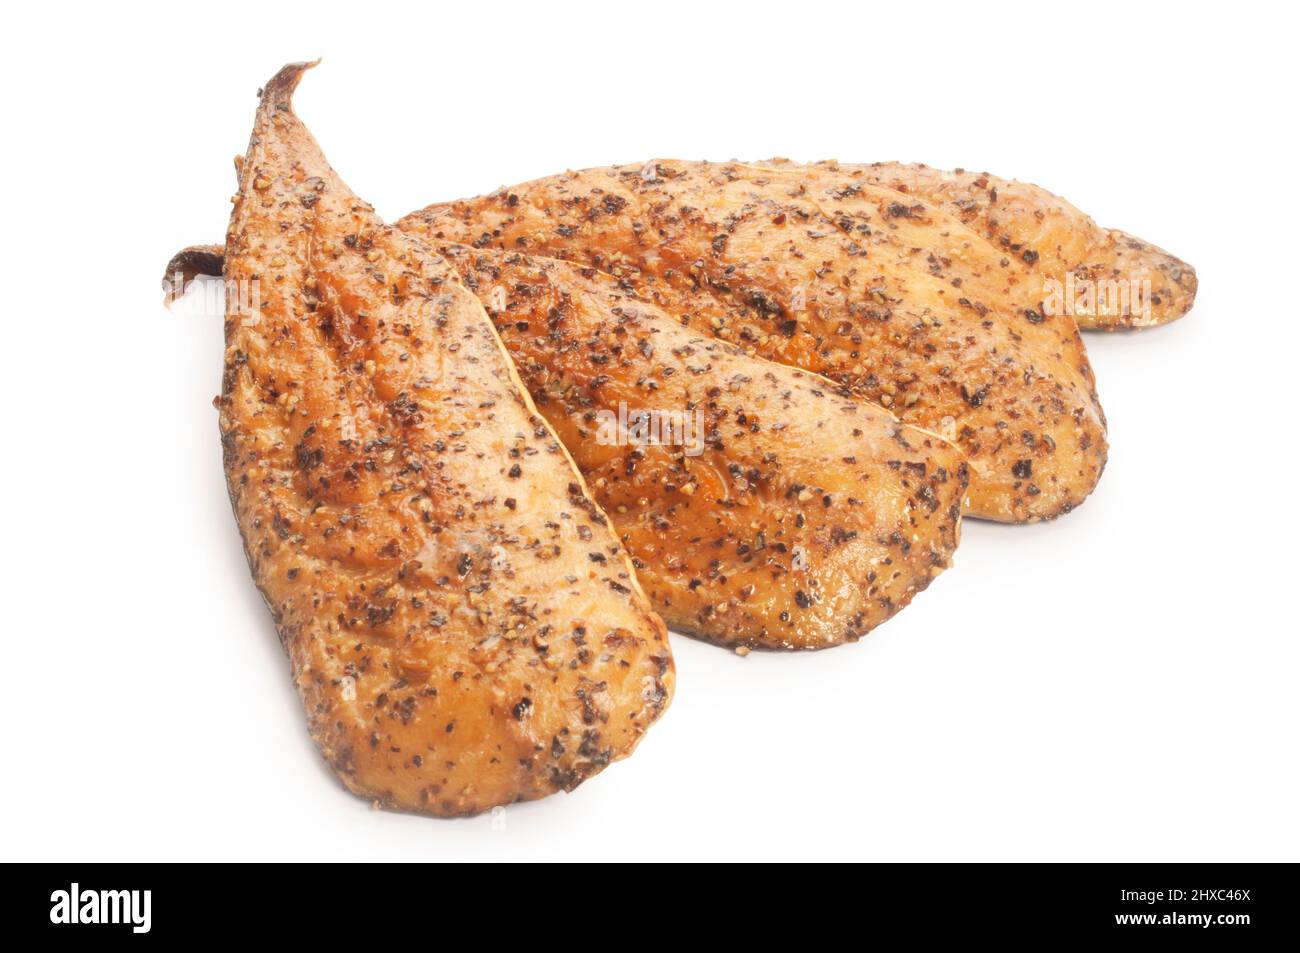 Studio shot of hot smoked, peppered mackerel fillets cut out against a white background - John Gollop Stock Photo